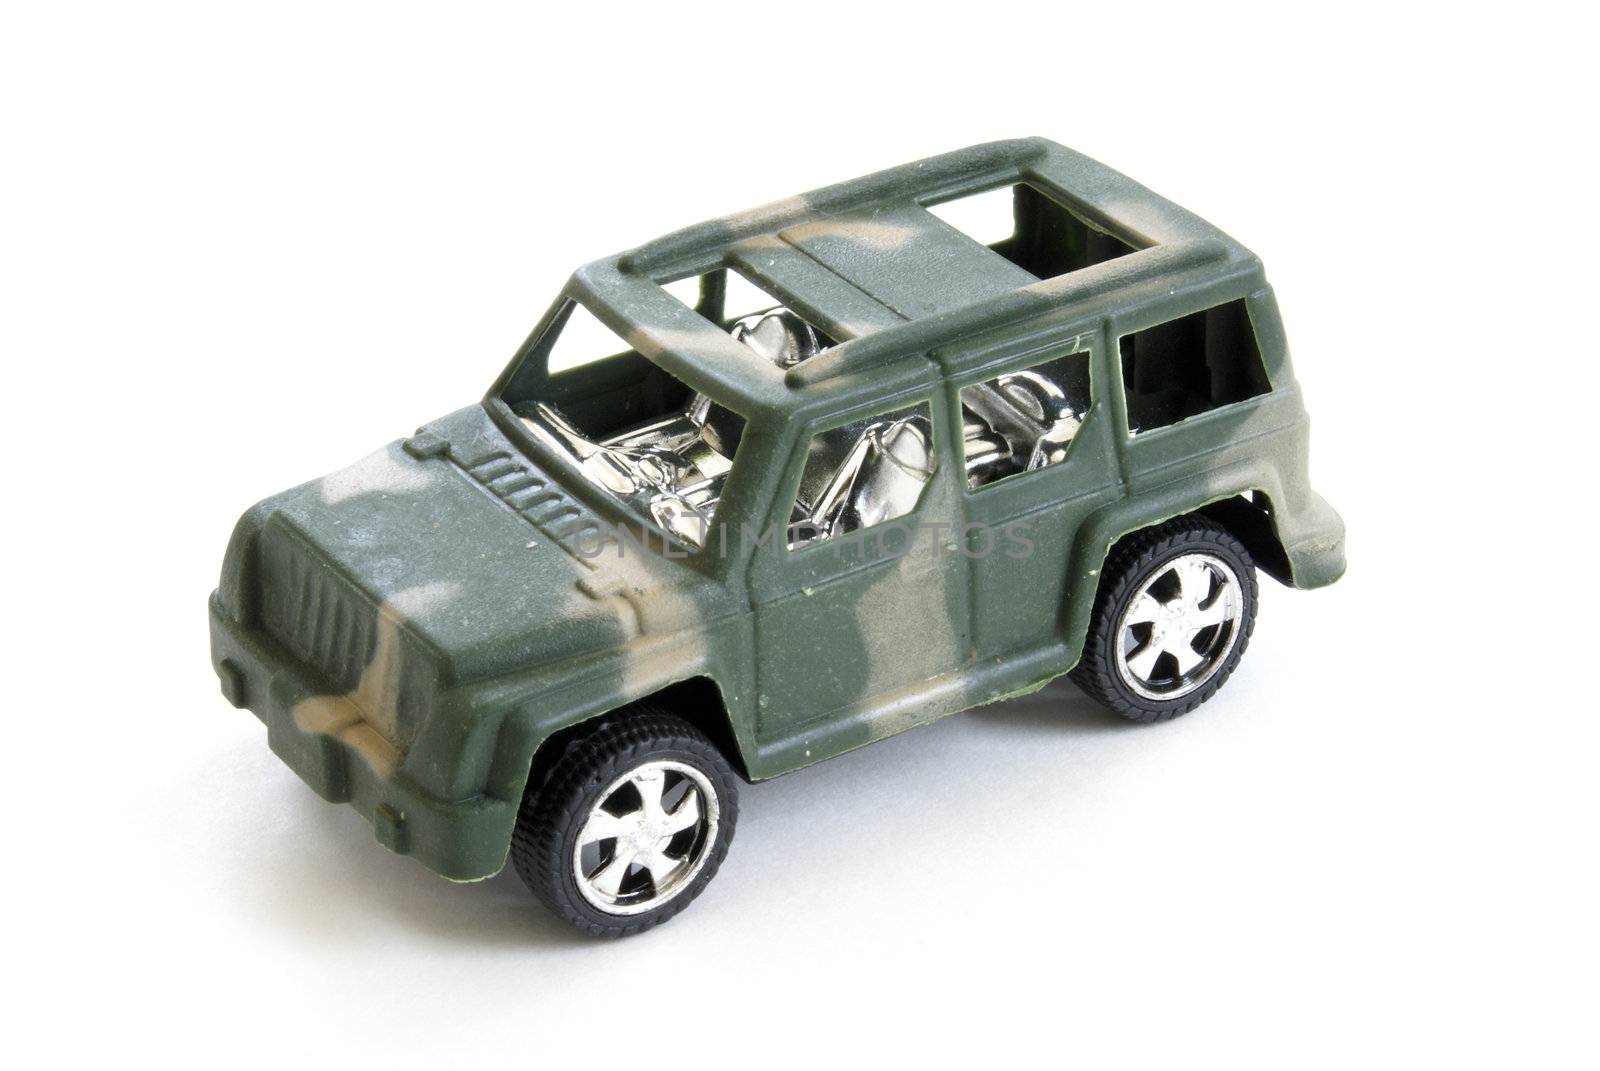 Toy Military Vehicle by AlphaBaby